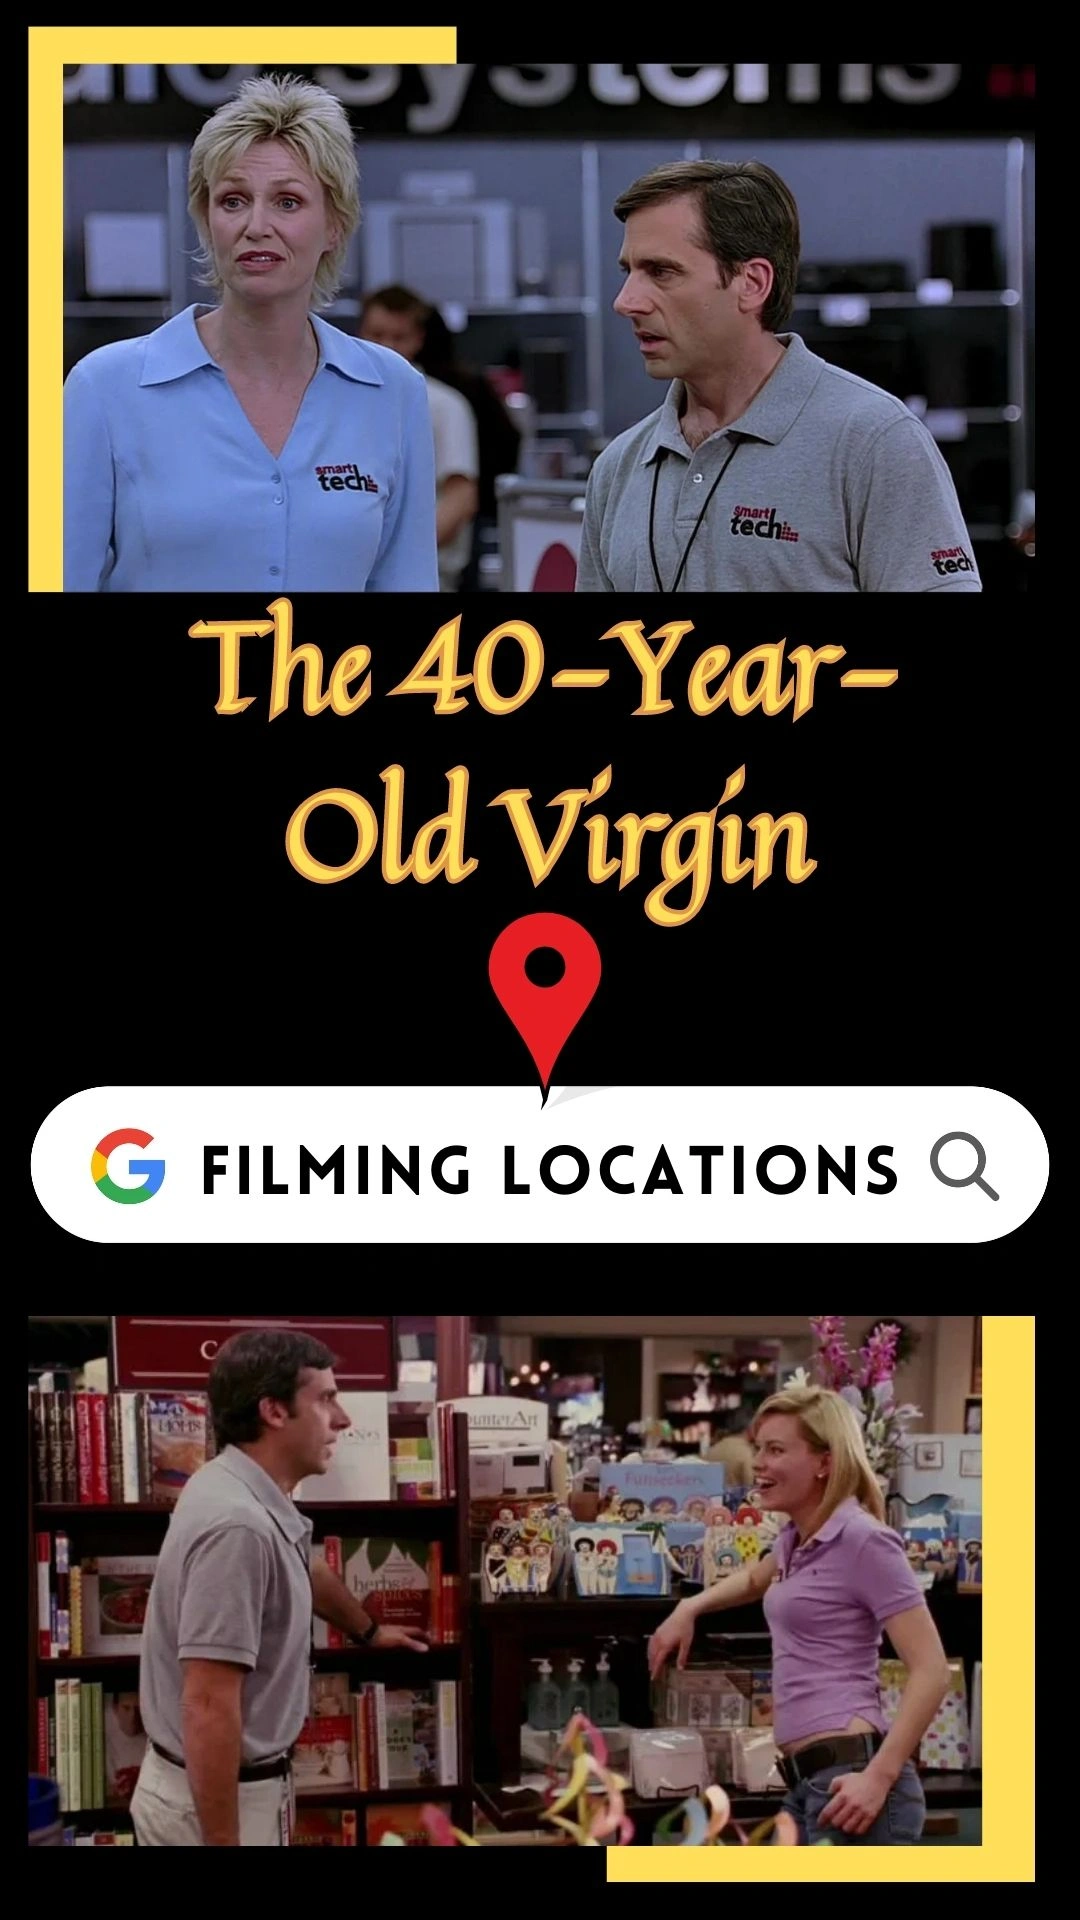 The 40-Year-Old Virgin Filming Locations